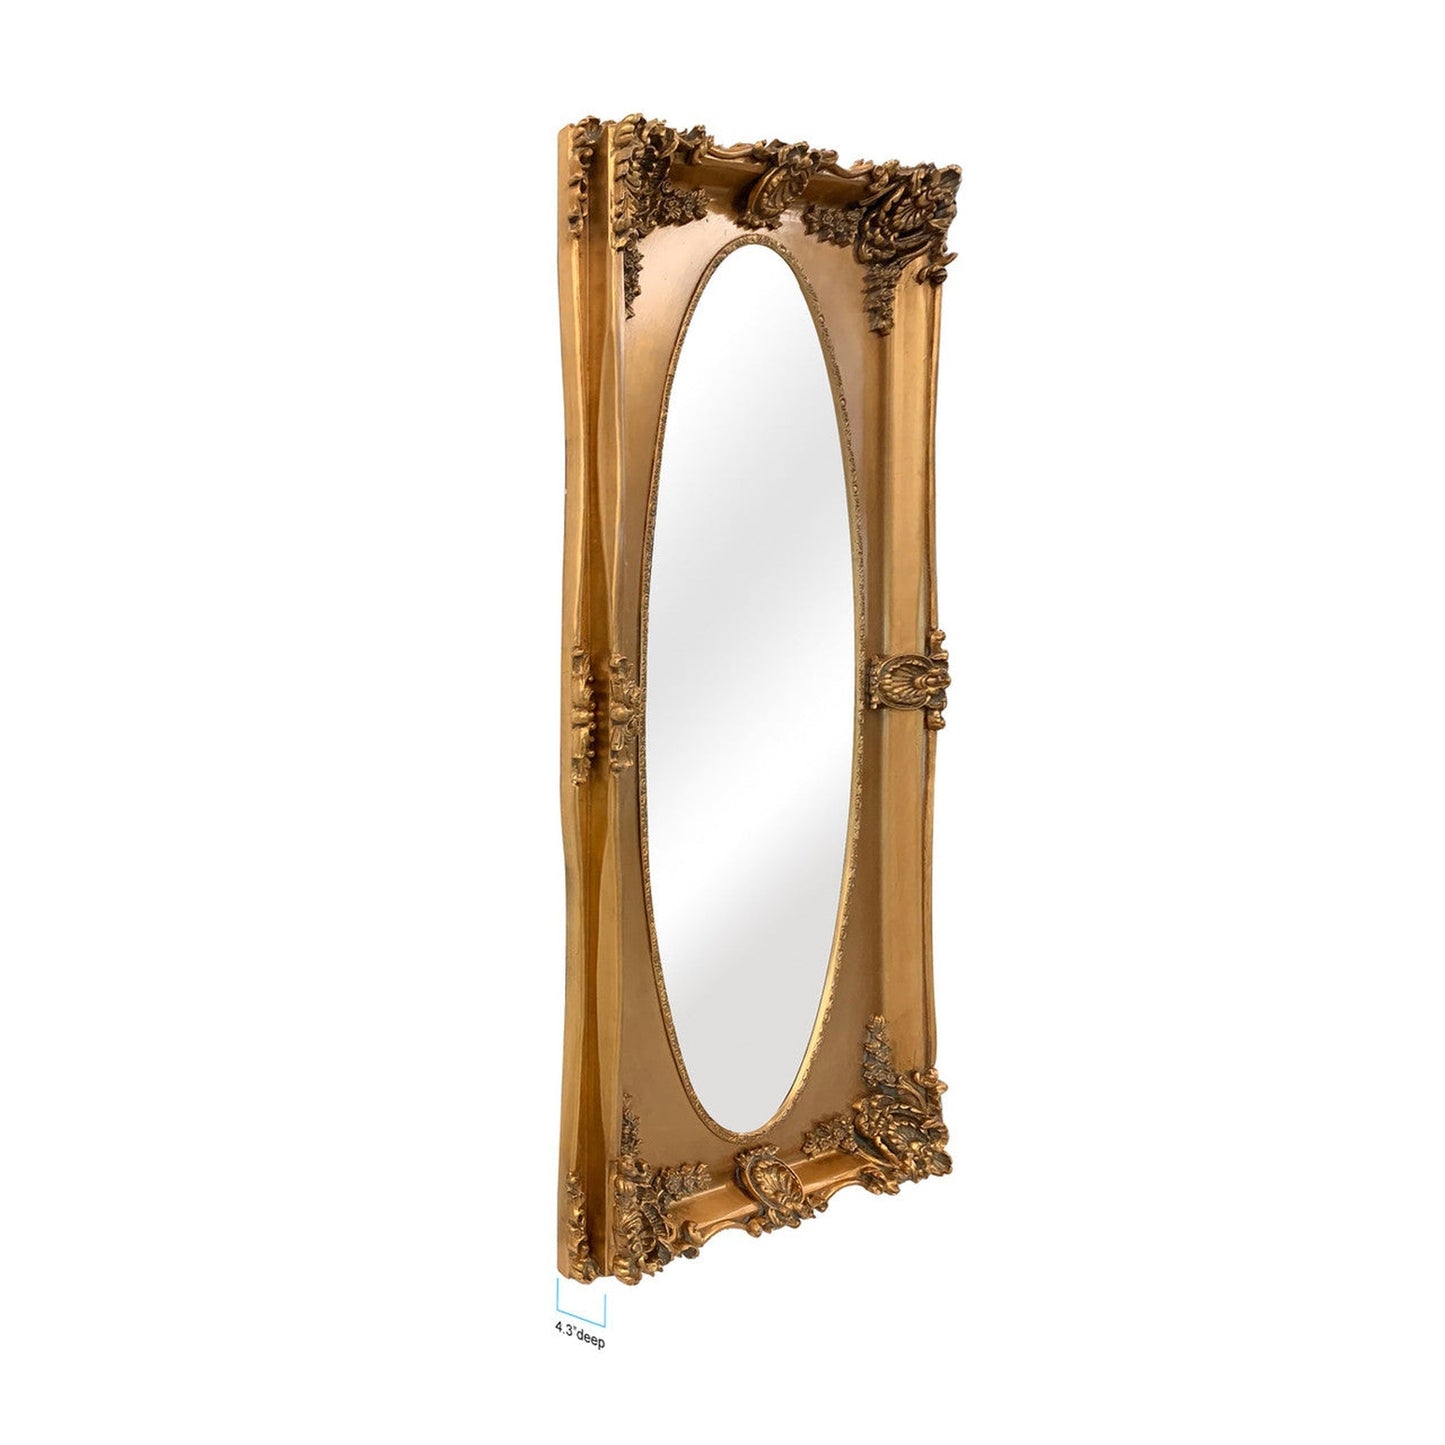 SBC Decor Park Avenue 36" x 79" Wall-Mounted Wood Frame Wall Mirror In Antique Gold Finish